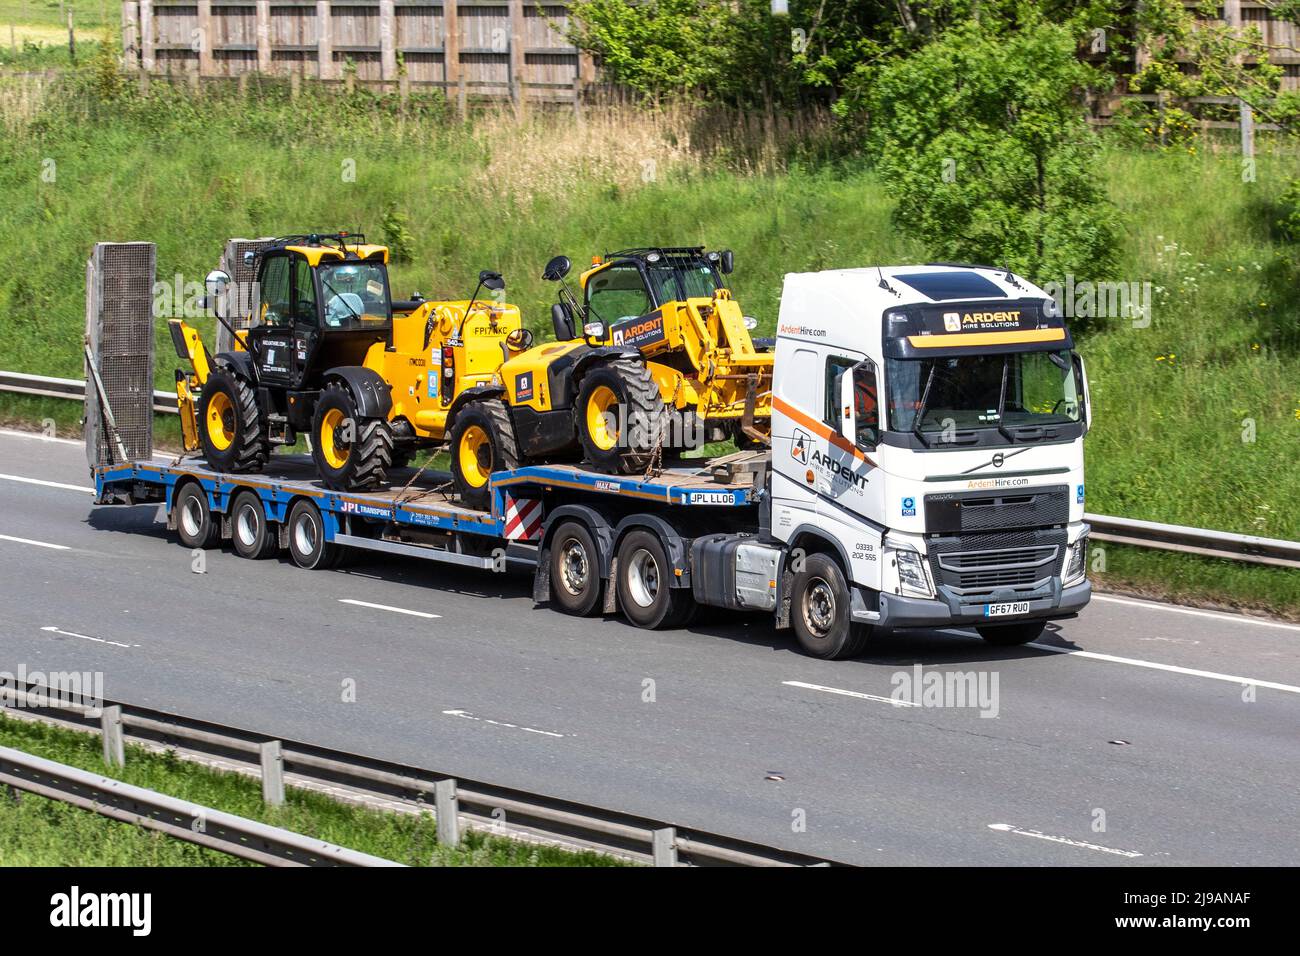 ARDENT HIRE SOLUTIONS 2017 white VOLVO FH500 6X2T PA HSKLP towing Max Trailer with two yellow JCB 4400 cc 540-17 tractors telescopic handlers on low-loader; driving on the M6 Motorway, Manchester, UK Stock Photo